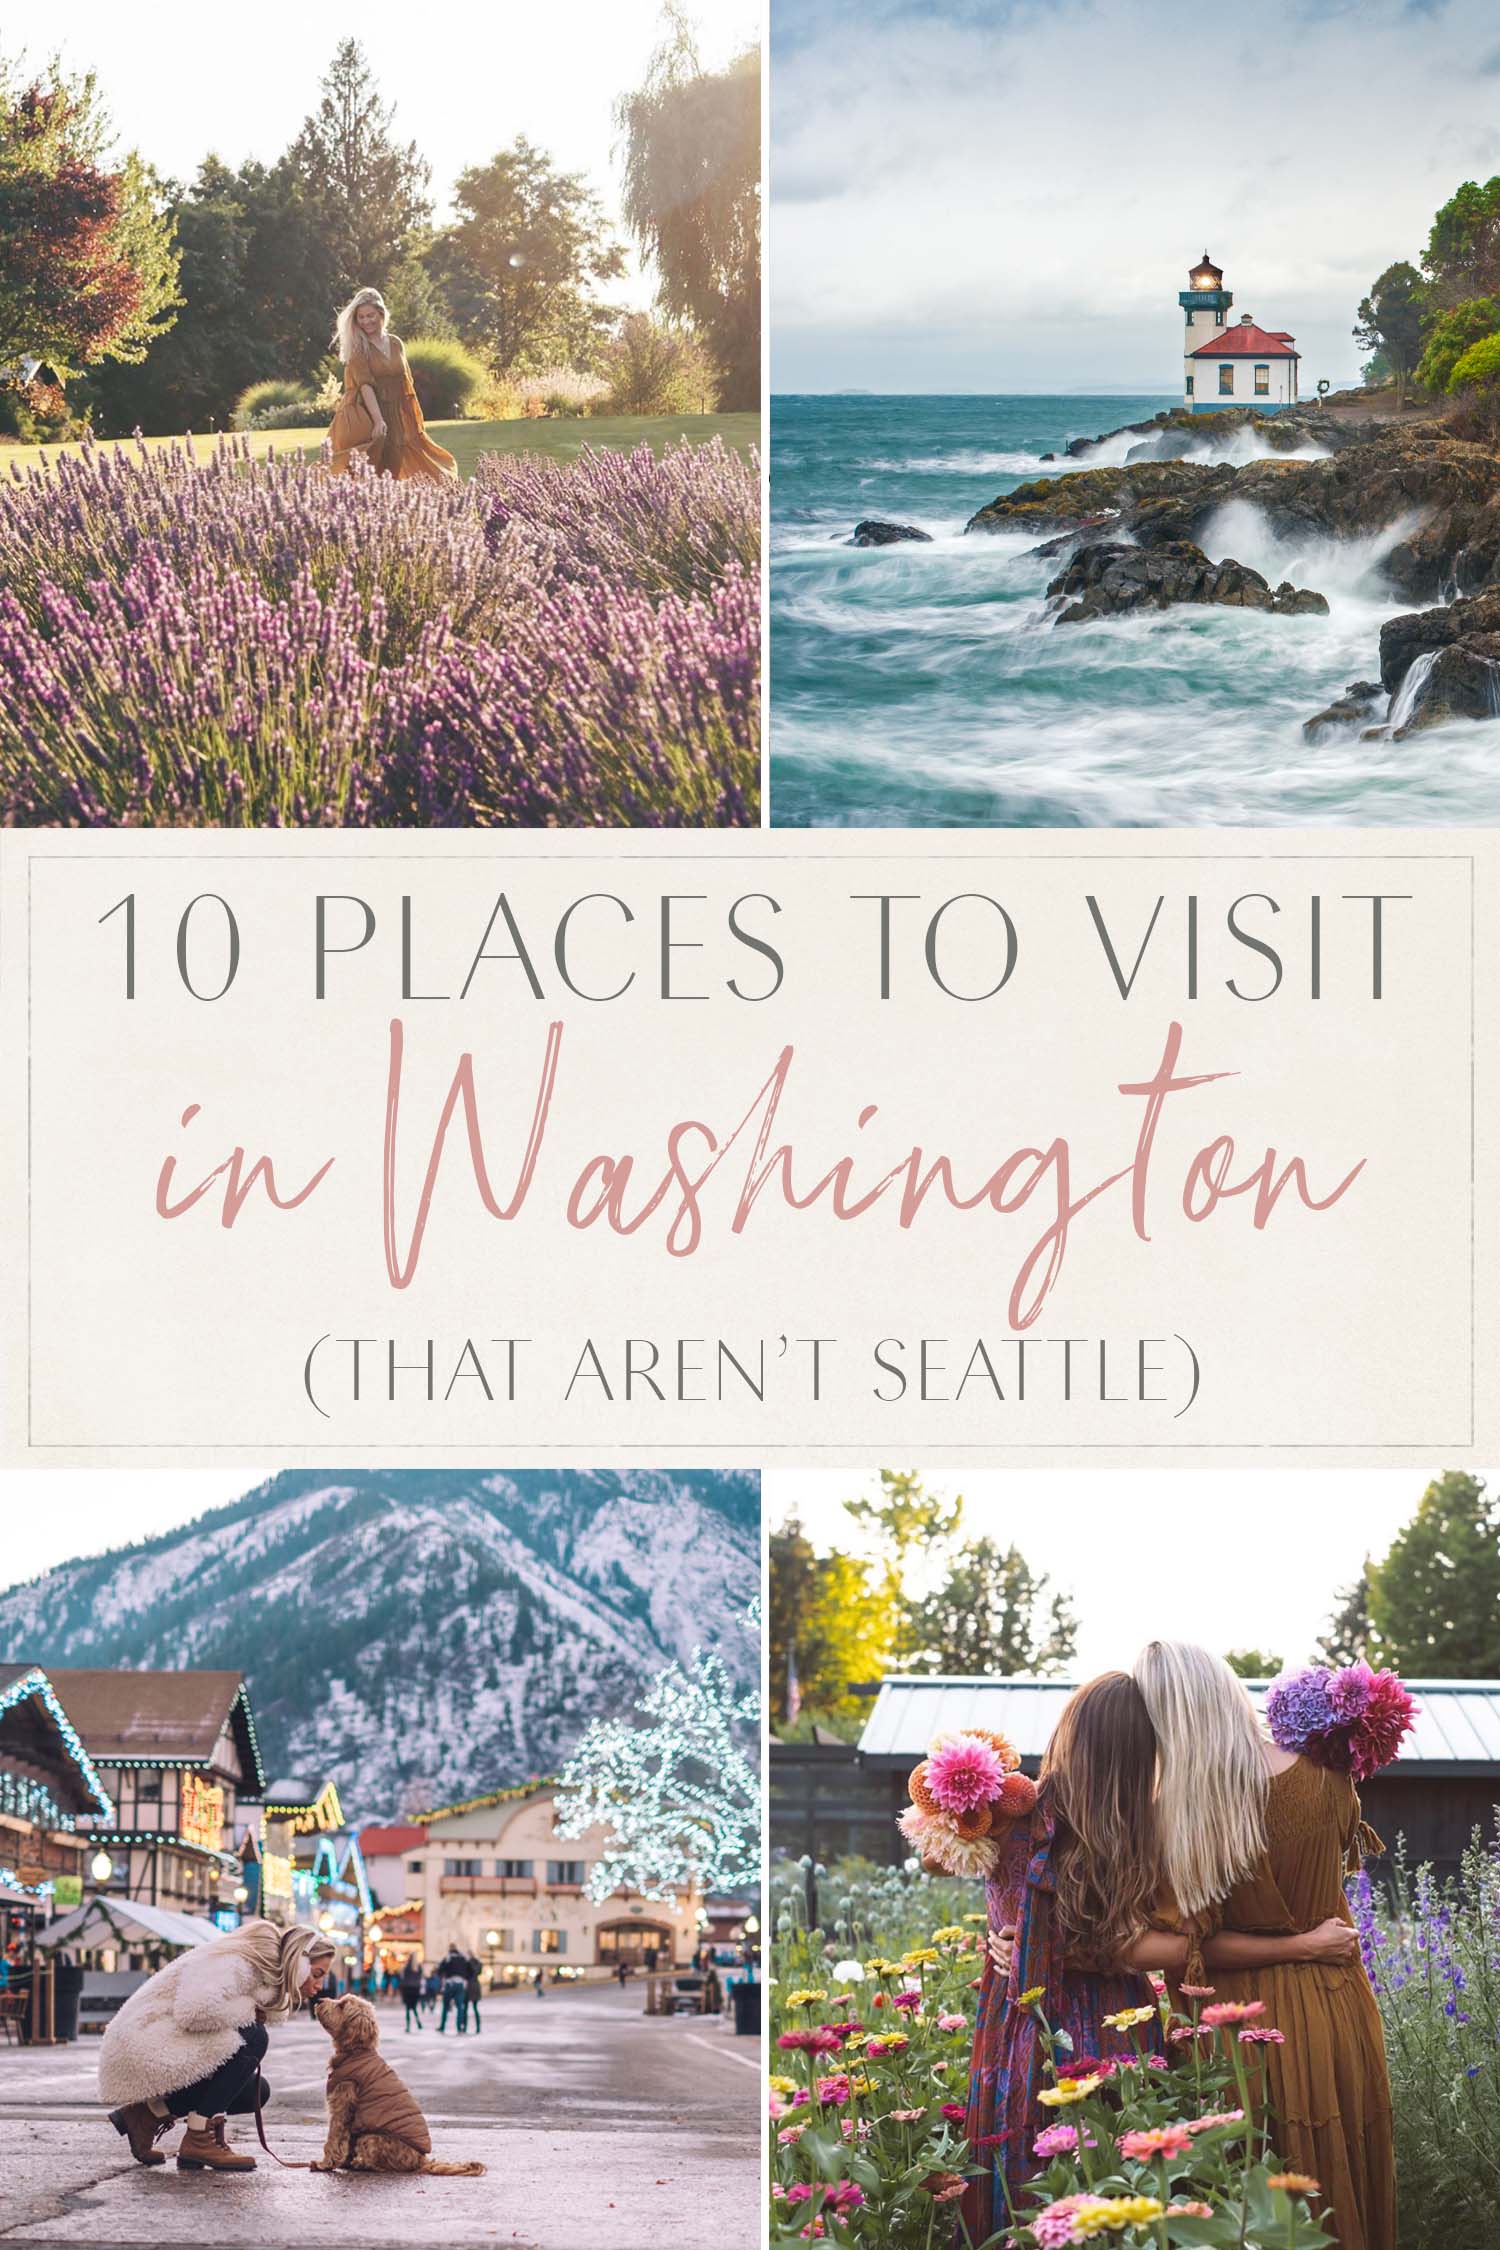 10 Places to Visit in Washington Not Seattle